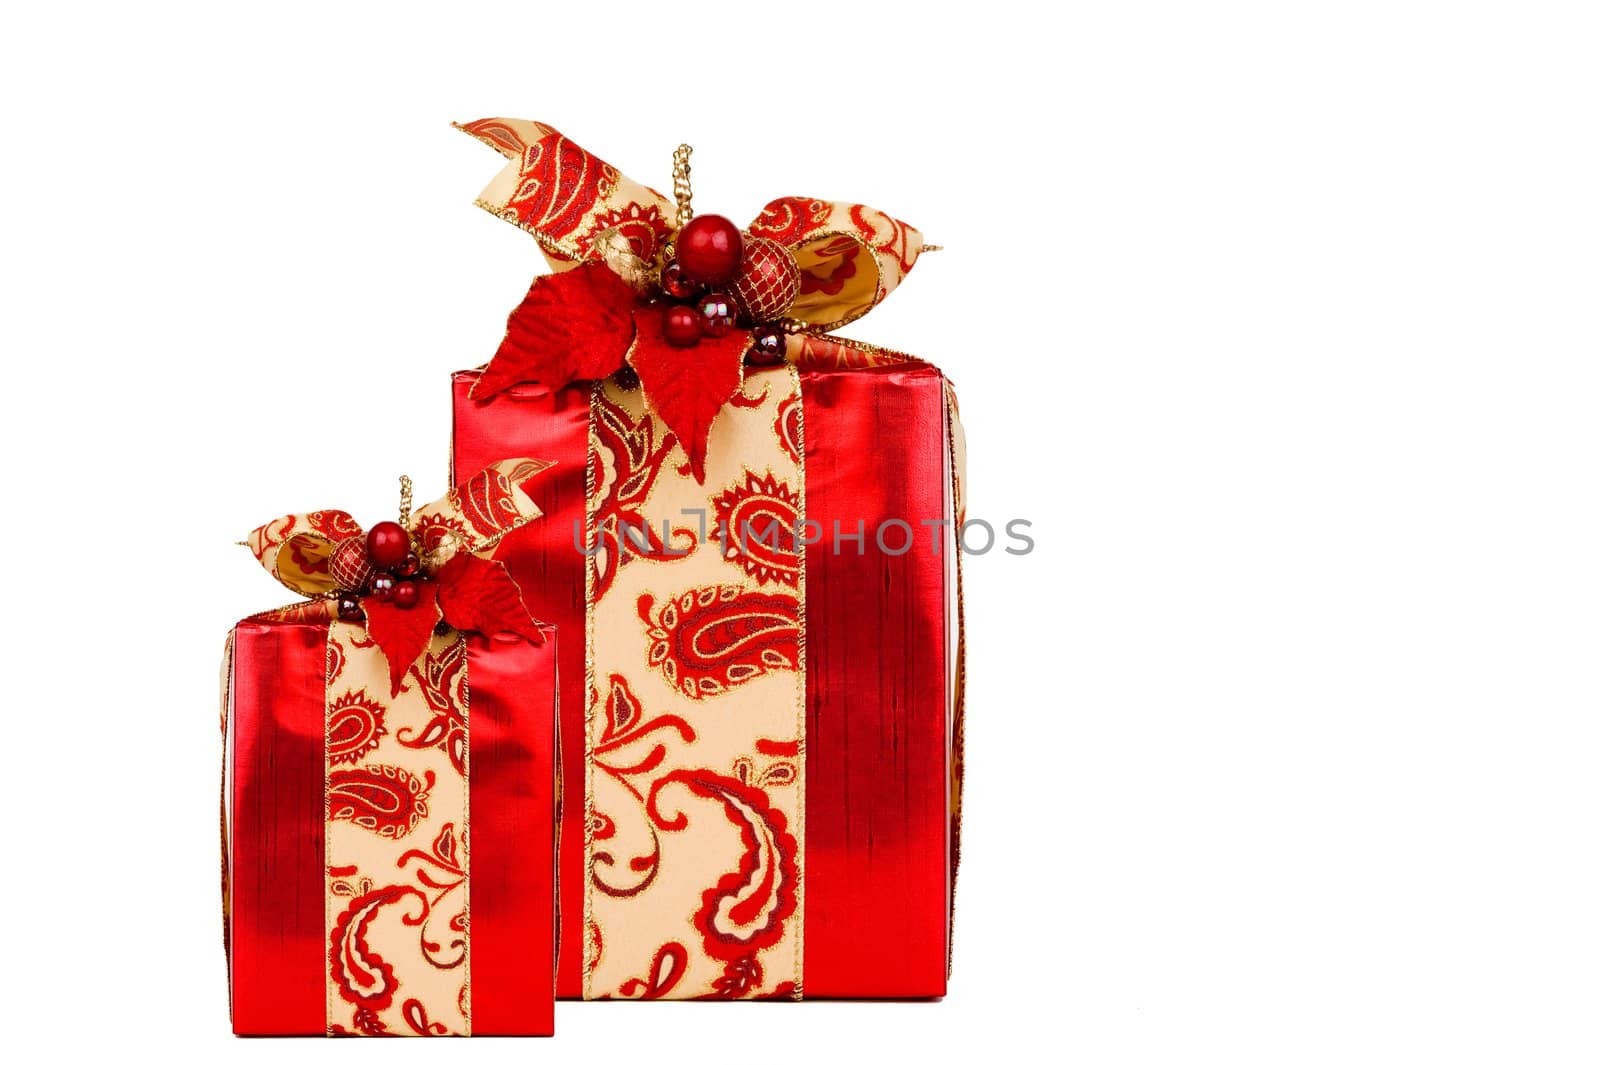 Two red holiday presents beautifully decorated with ribbon and adornments. Clipping path included.